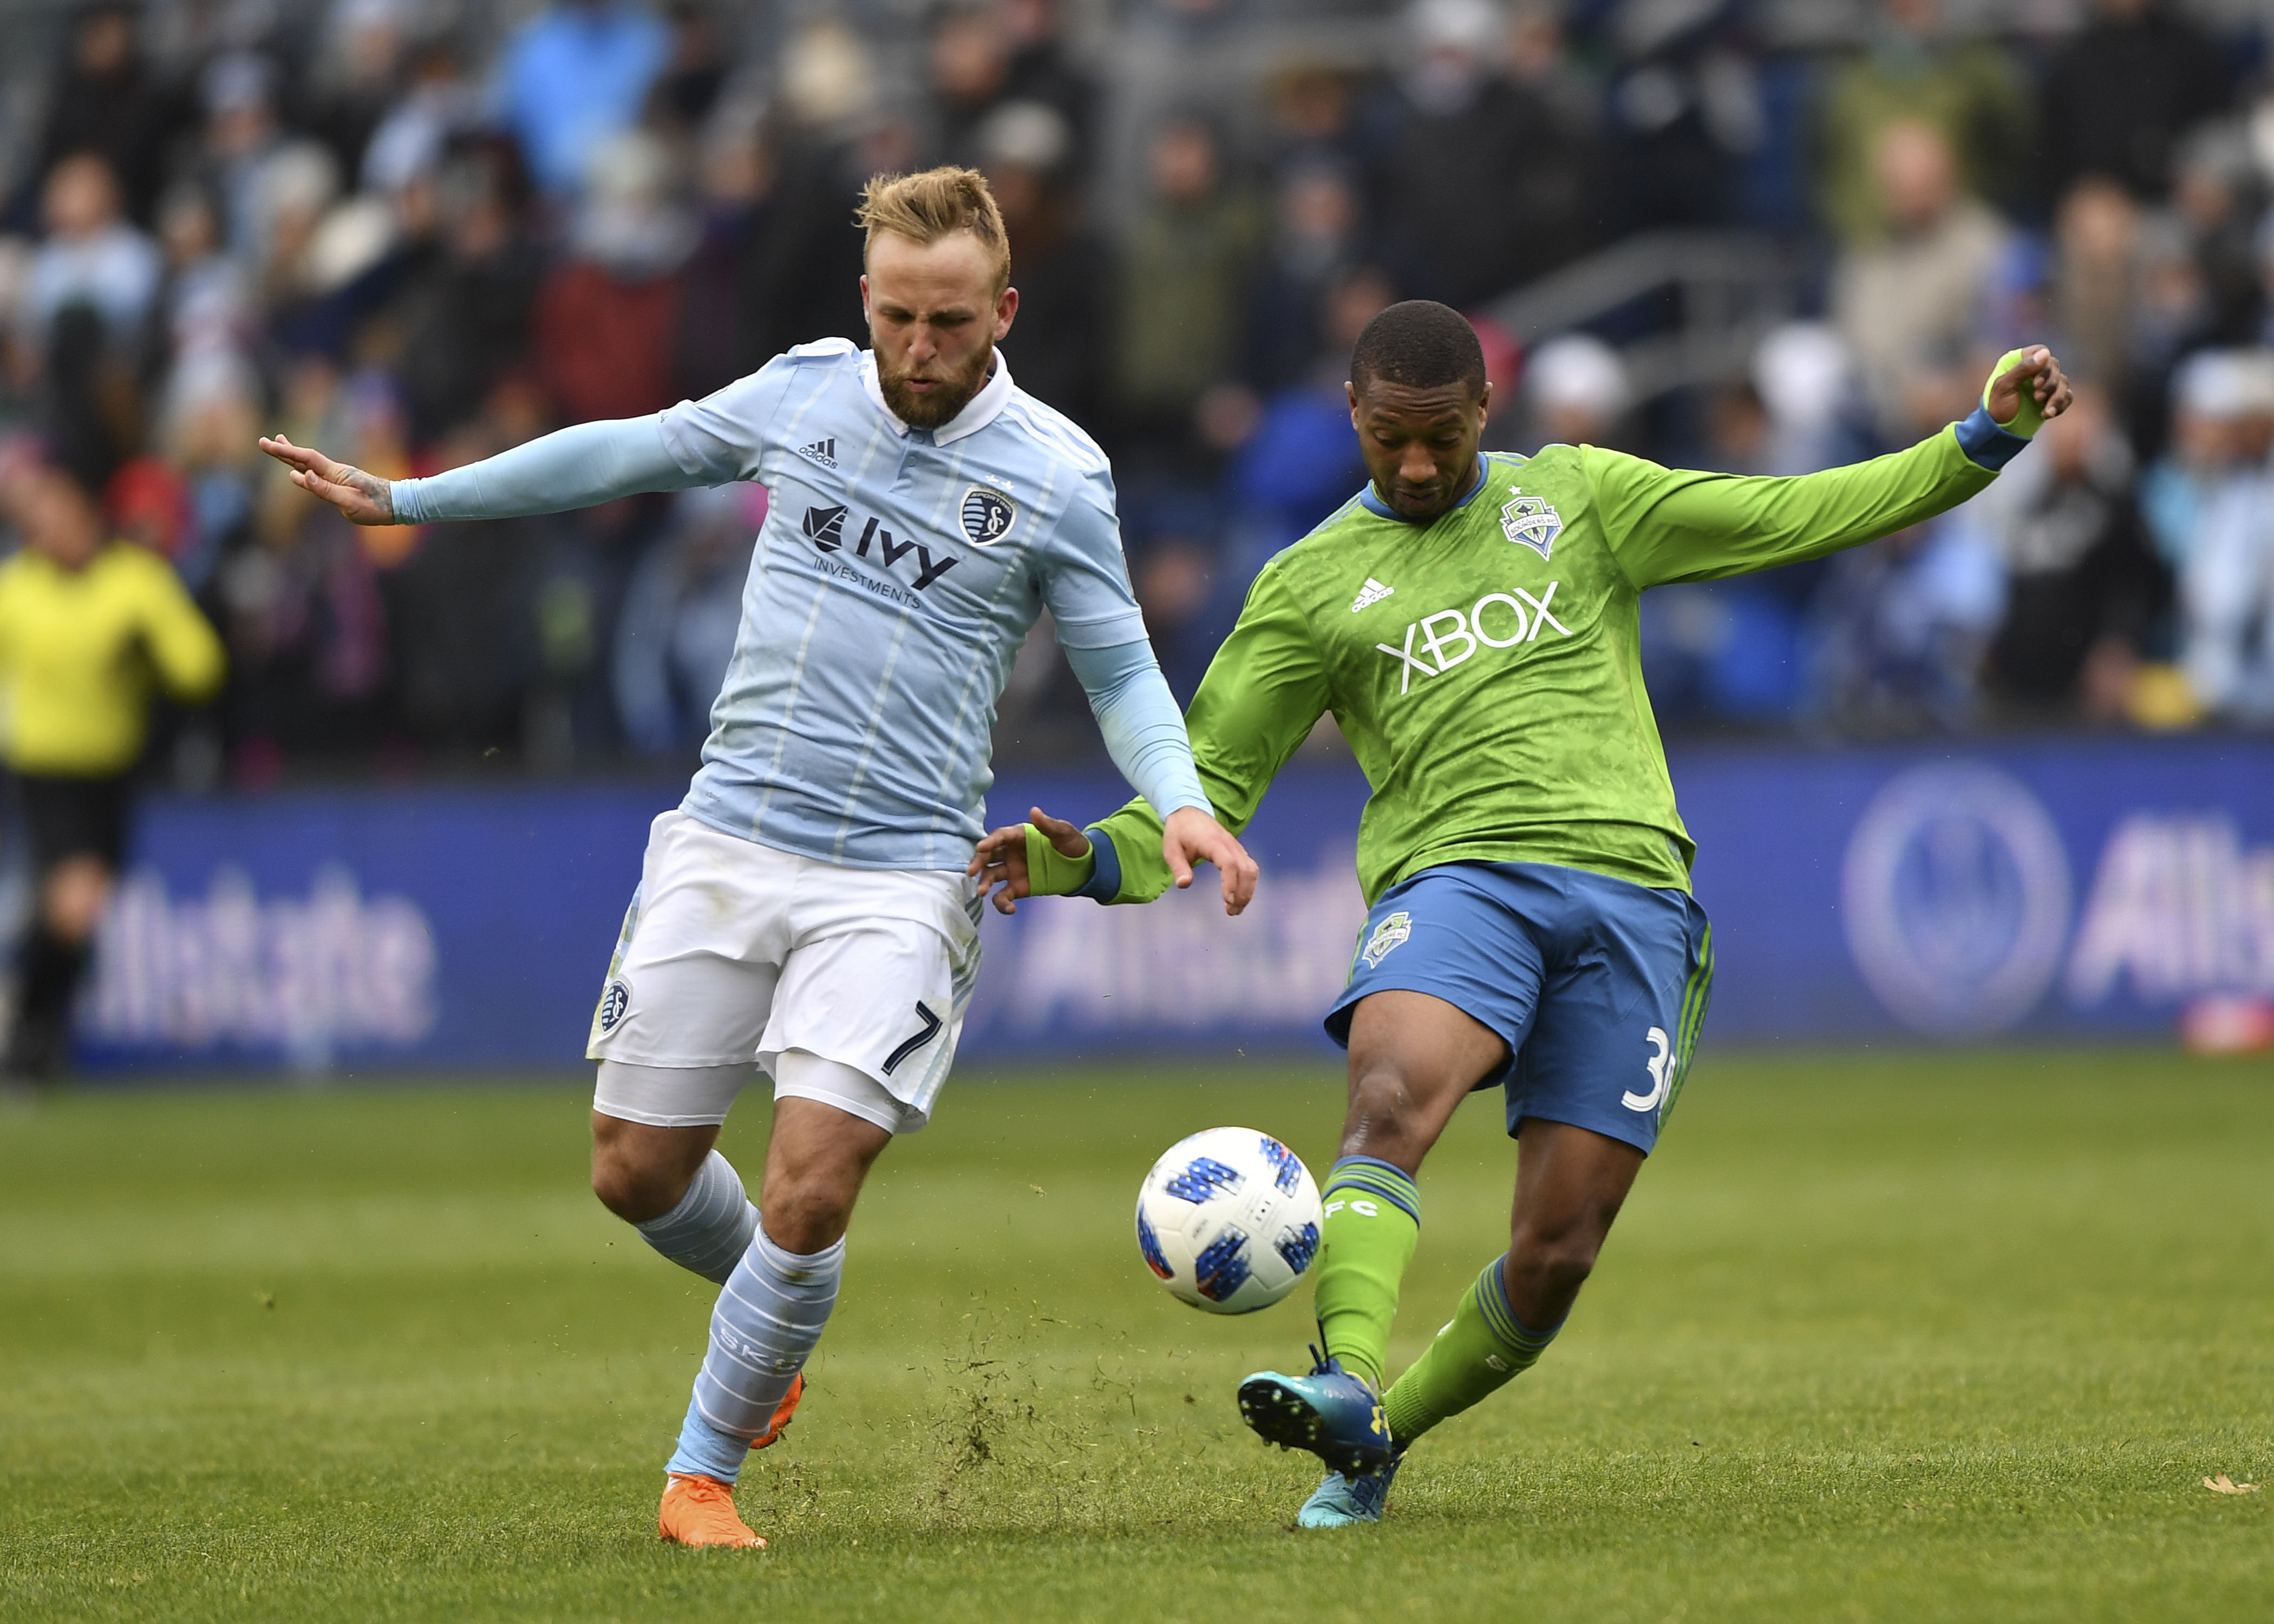 MLS: Seattle Sounders at Sporting KC